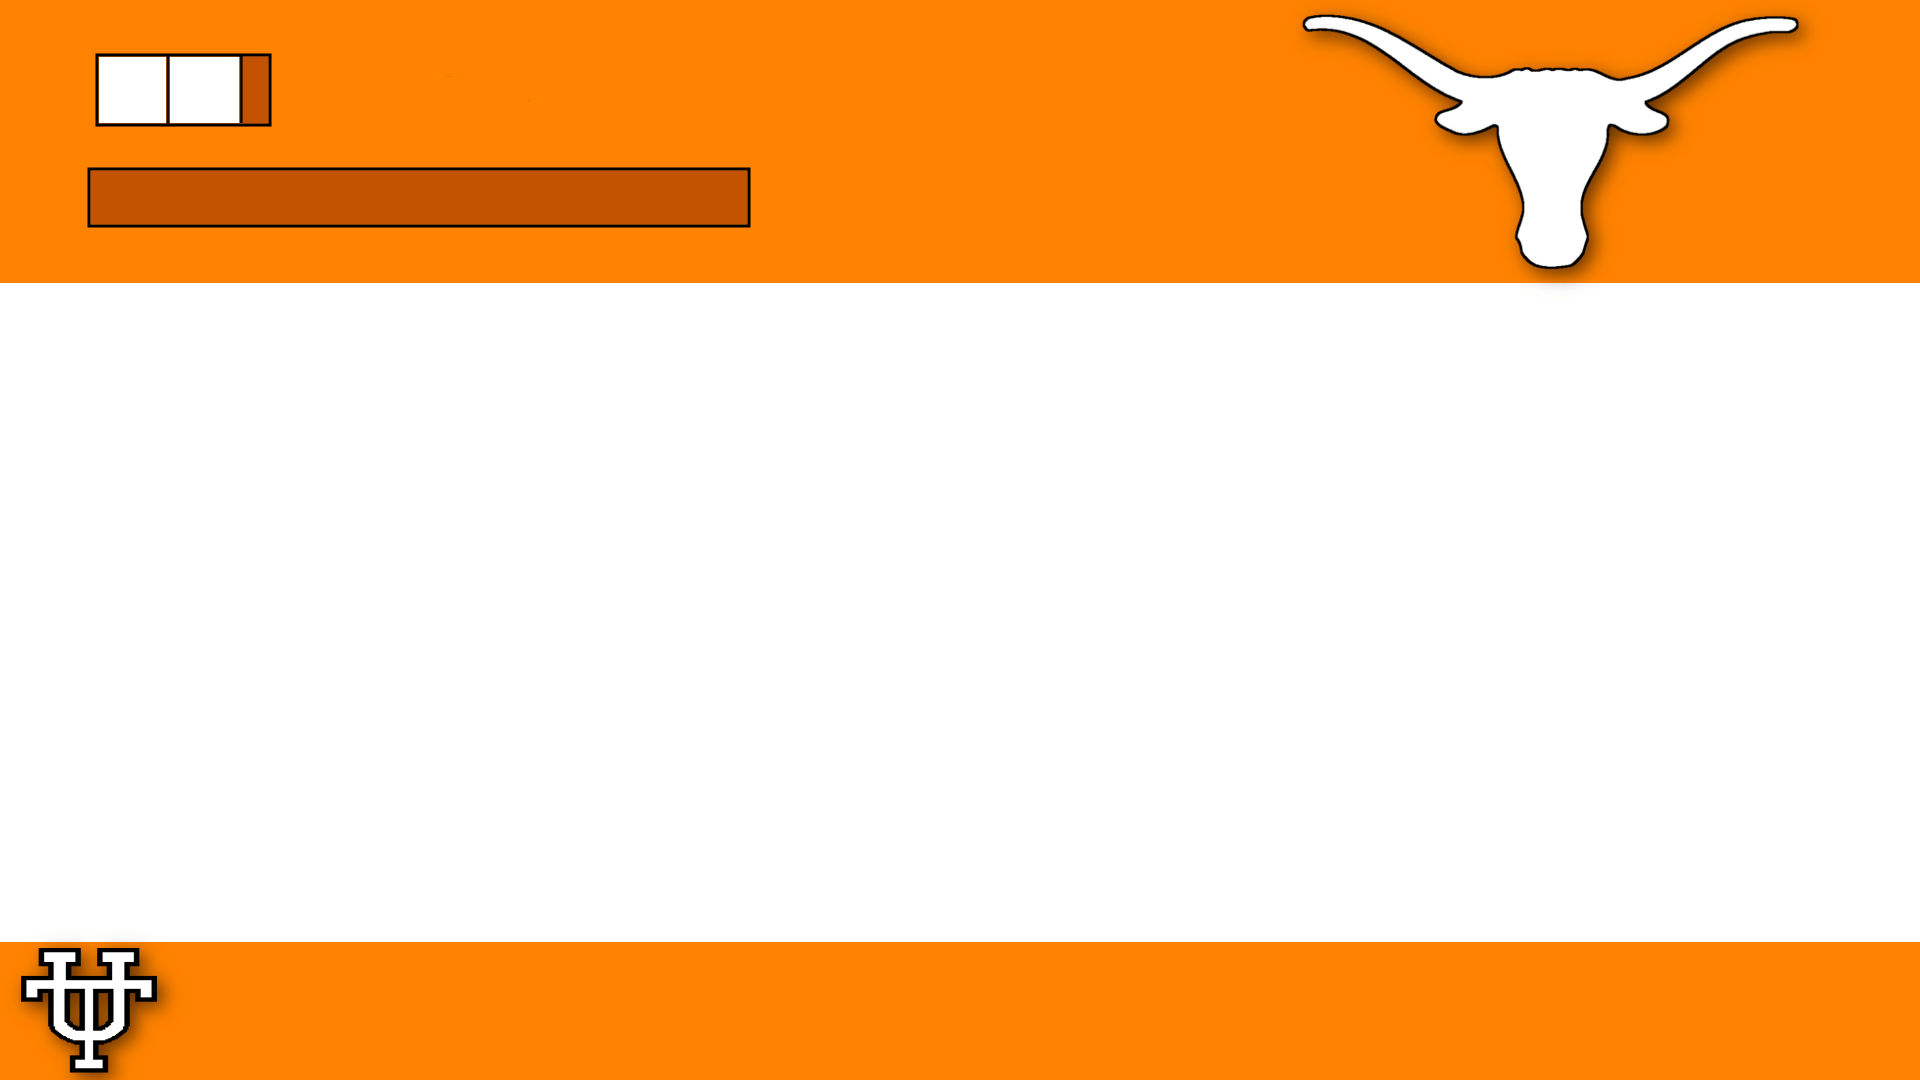 Texas Longhorns background I'm making for my Xbox One background